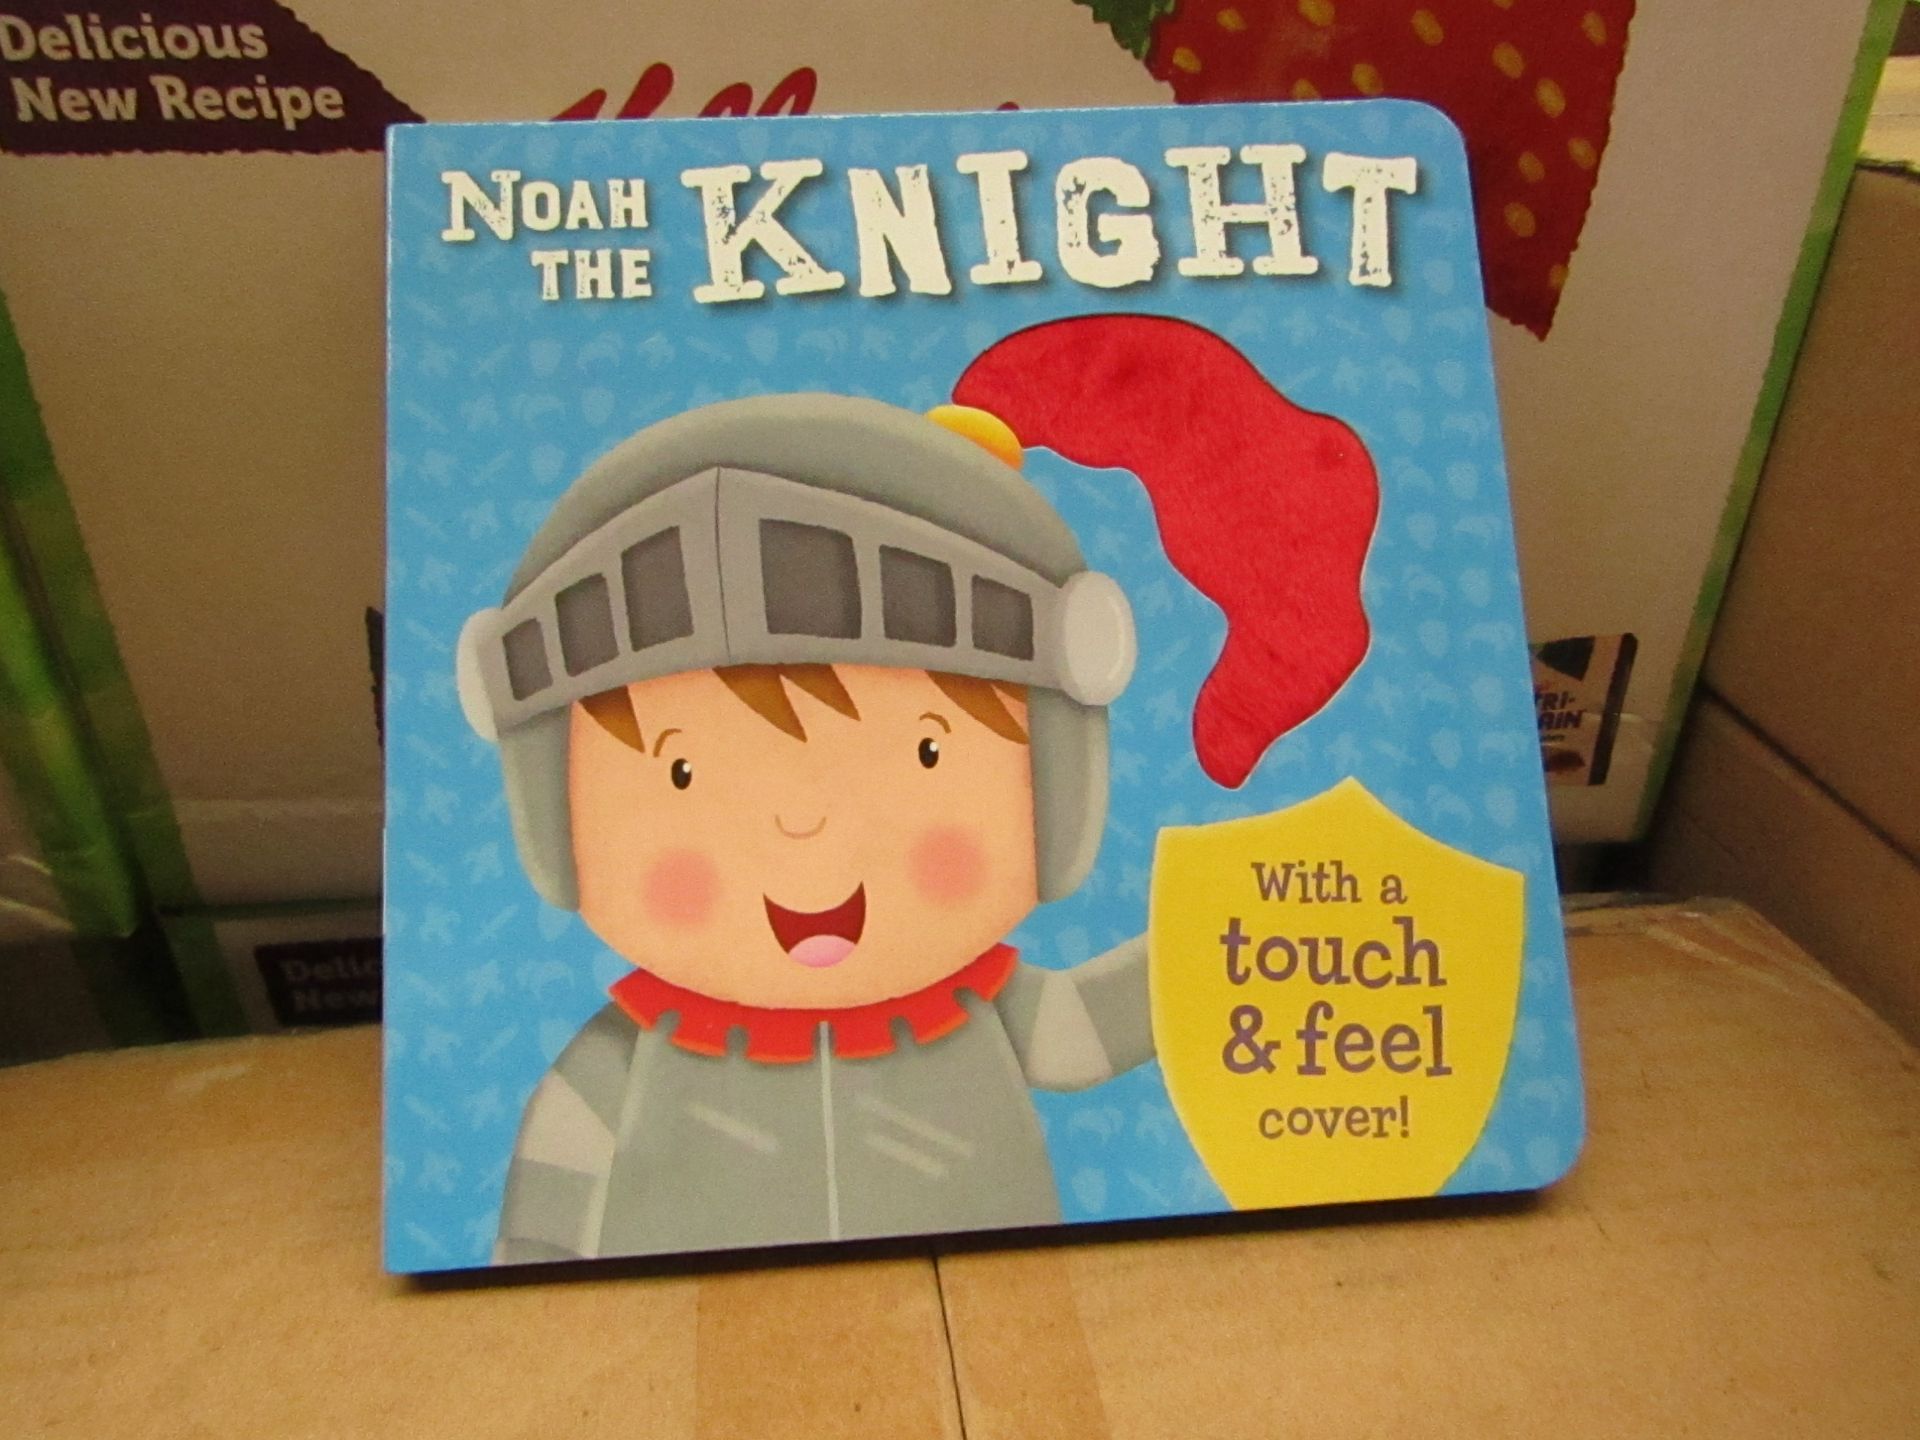 Box of approx 100 Noah the Knight Books with a Touch & Feel Cover - New & Boxed